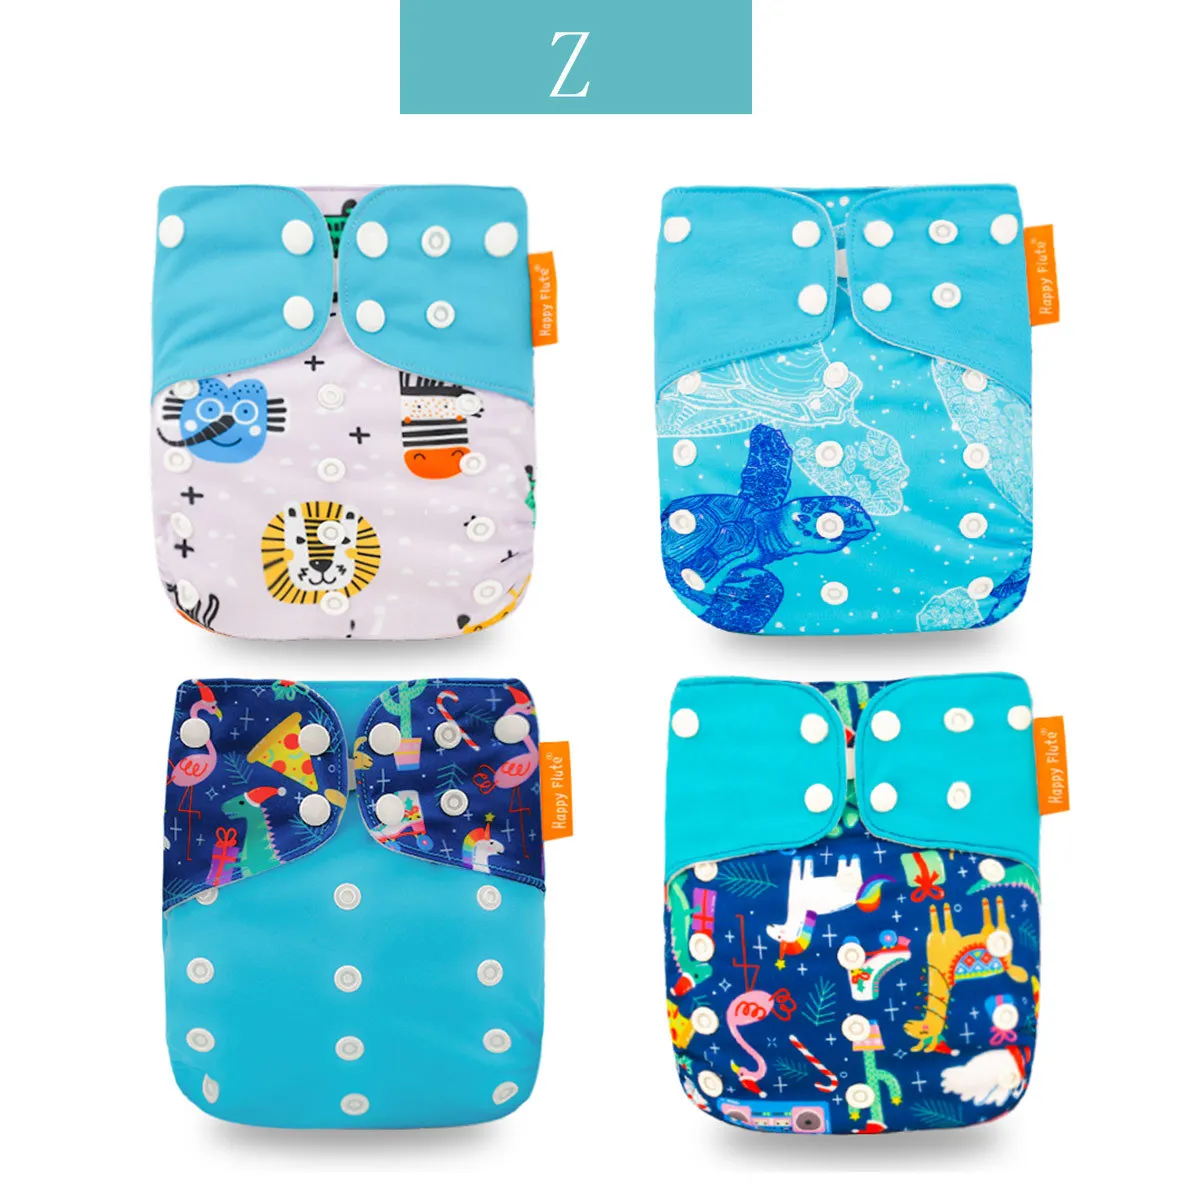 

4pcs/set Washable Eco-friendly Baby Cloth Diaper Ecological Adjustable Nappy Reusable Diaper Fit 0-2year 3-15kg Diapers Panties